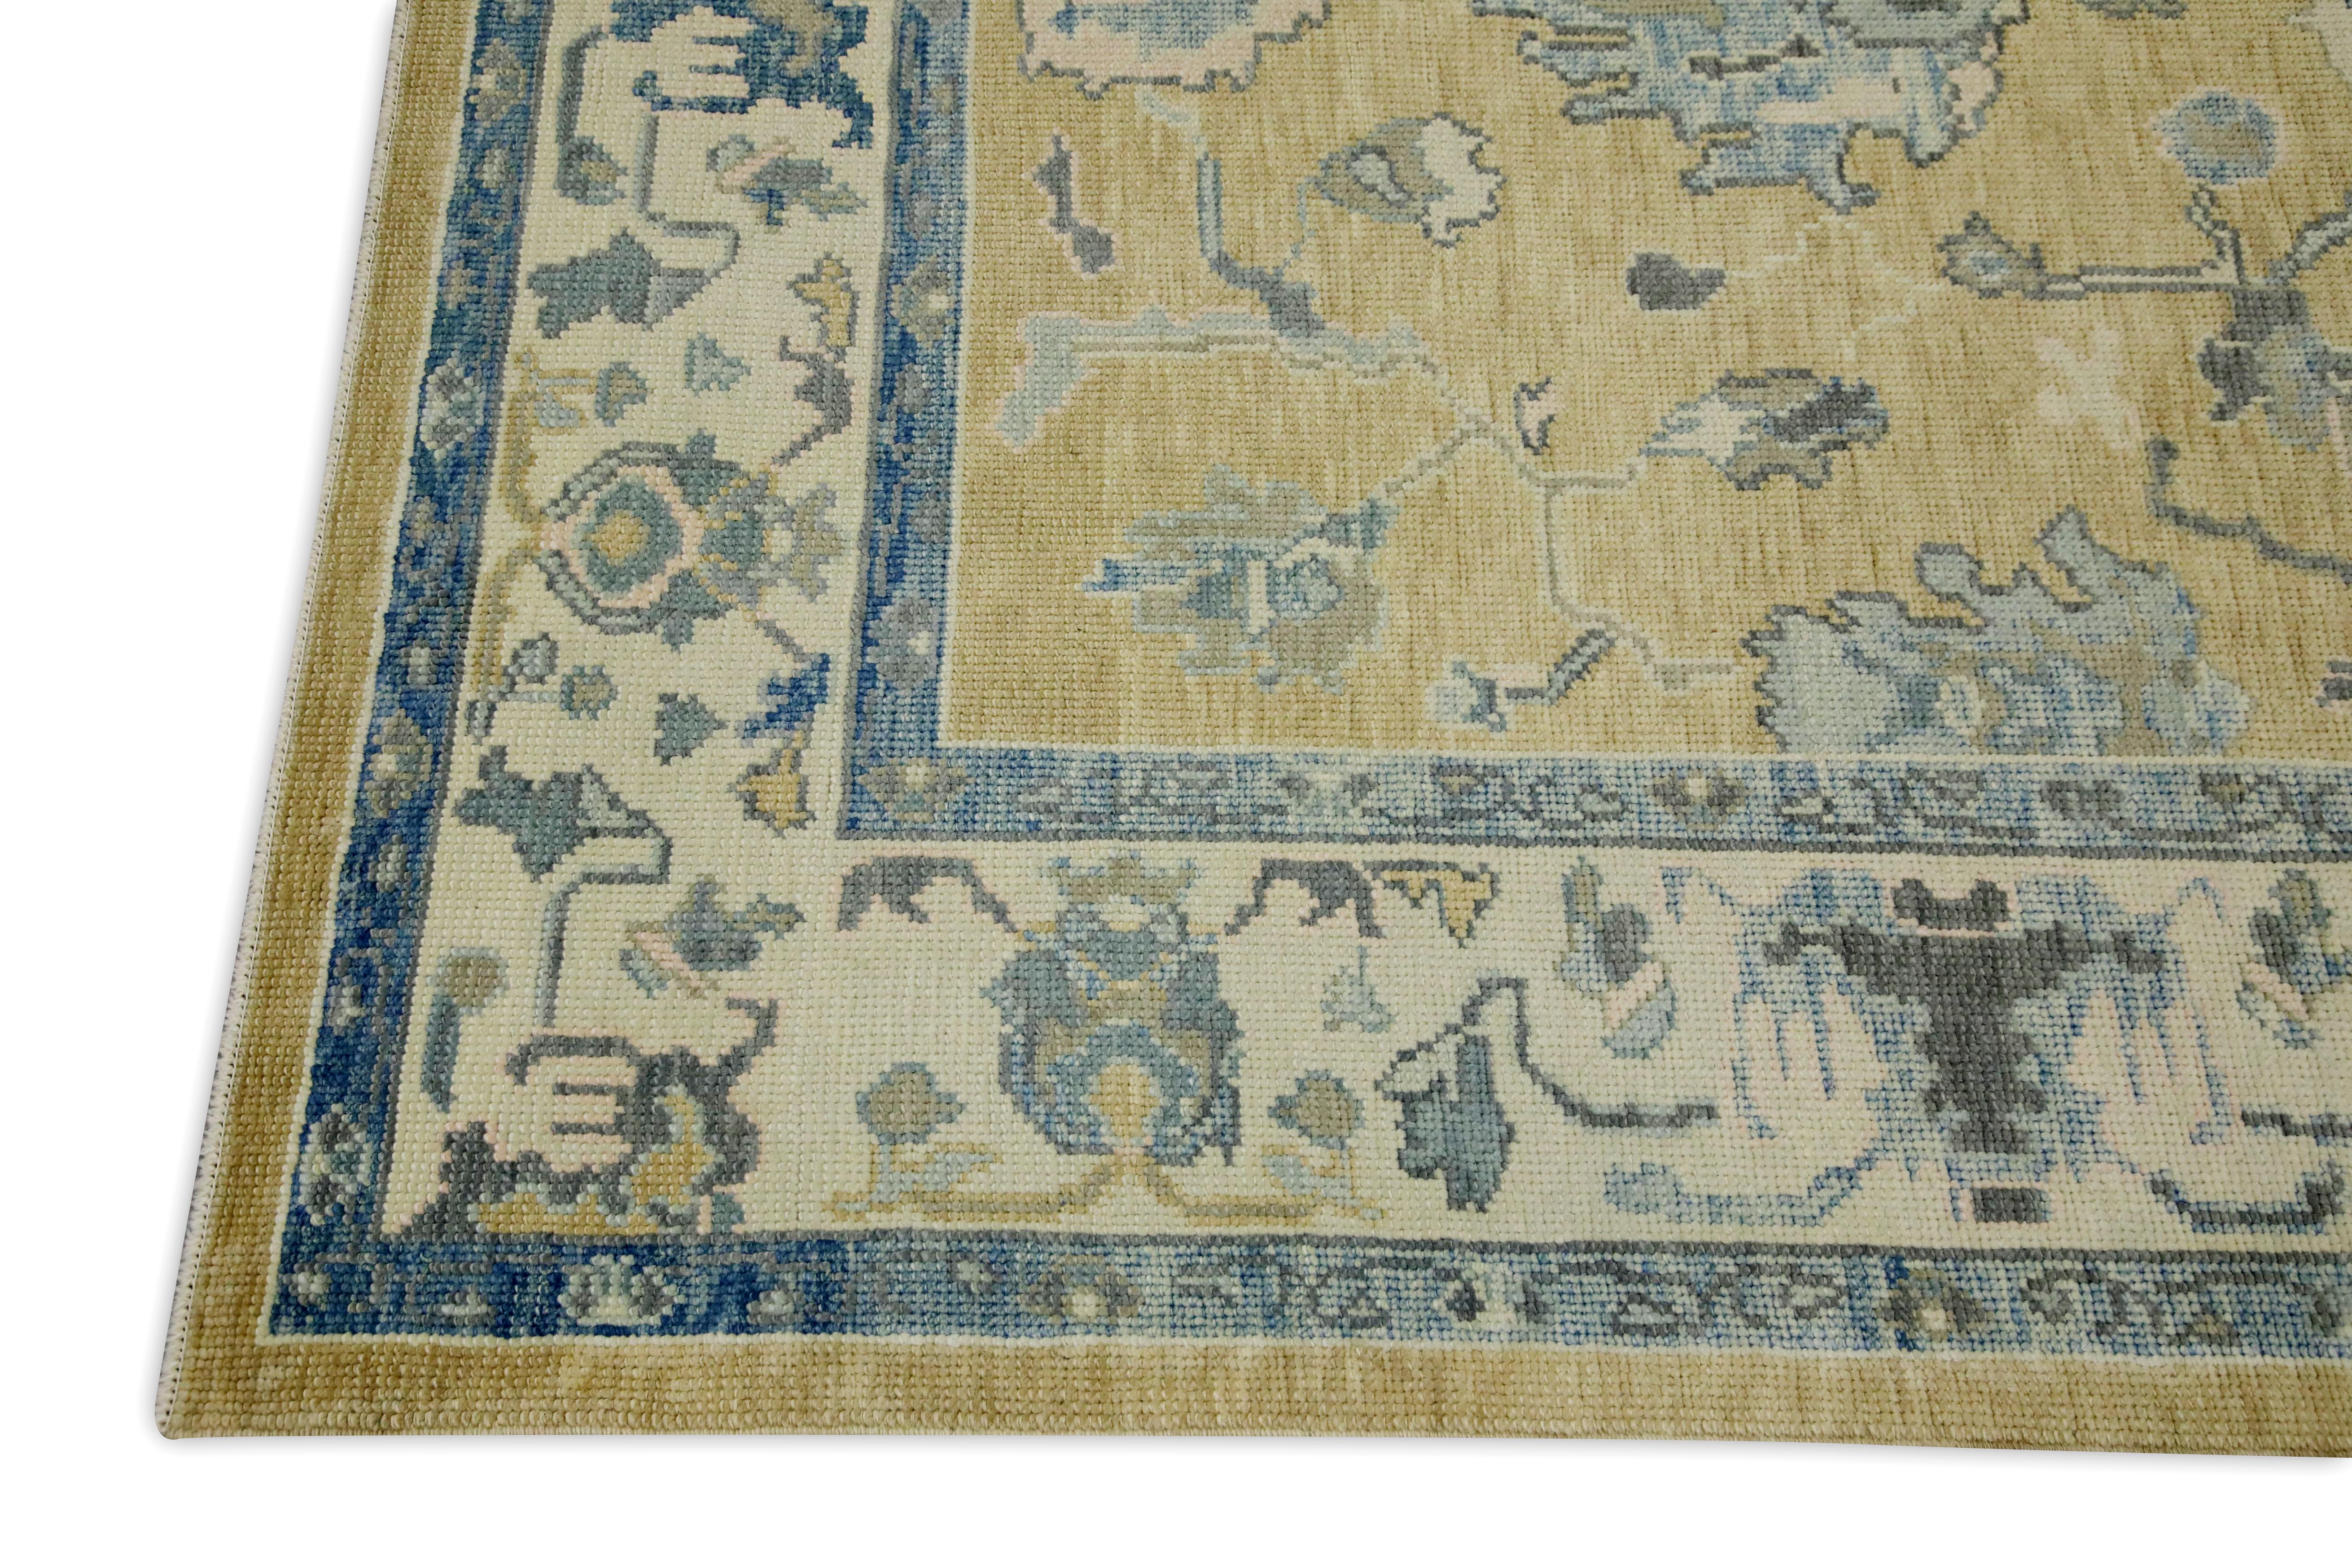 Vegetable Dyed Yellow & Blue Floral Design Handwoven Wool Turkish Oushak Rug 6'1